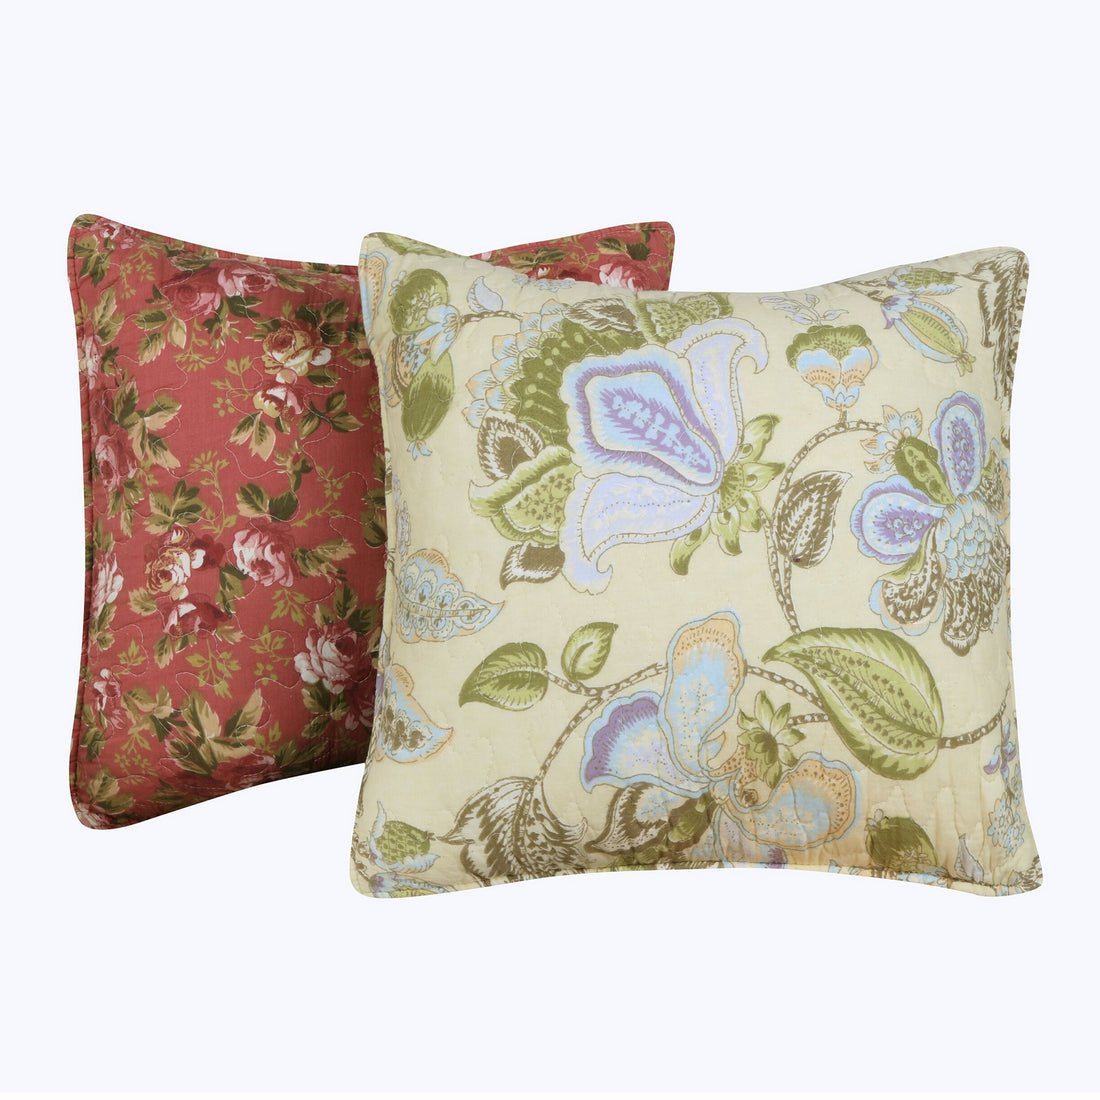 Eiger Fabric Decorative Pillow with Floral